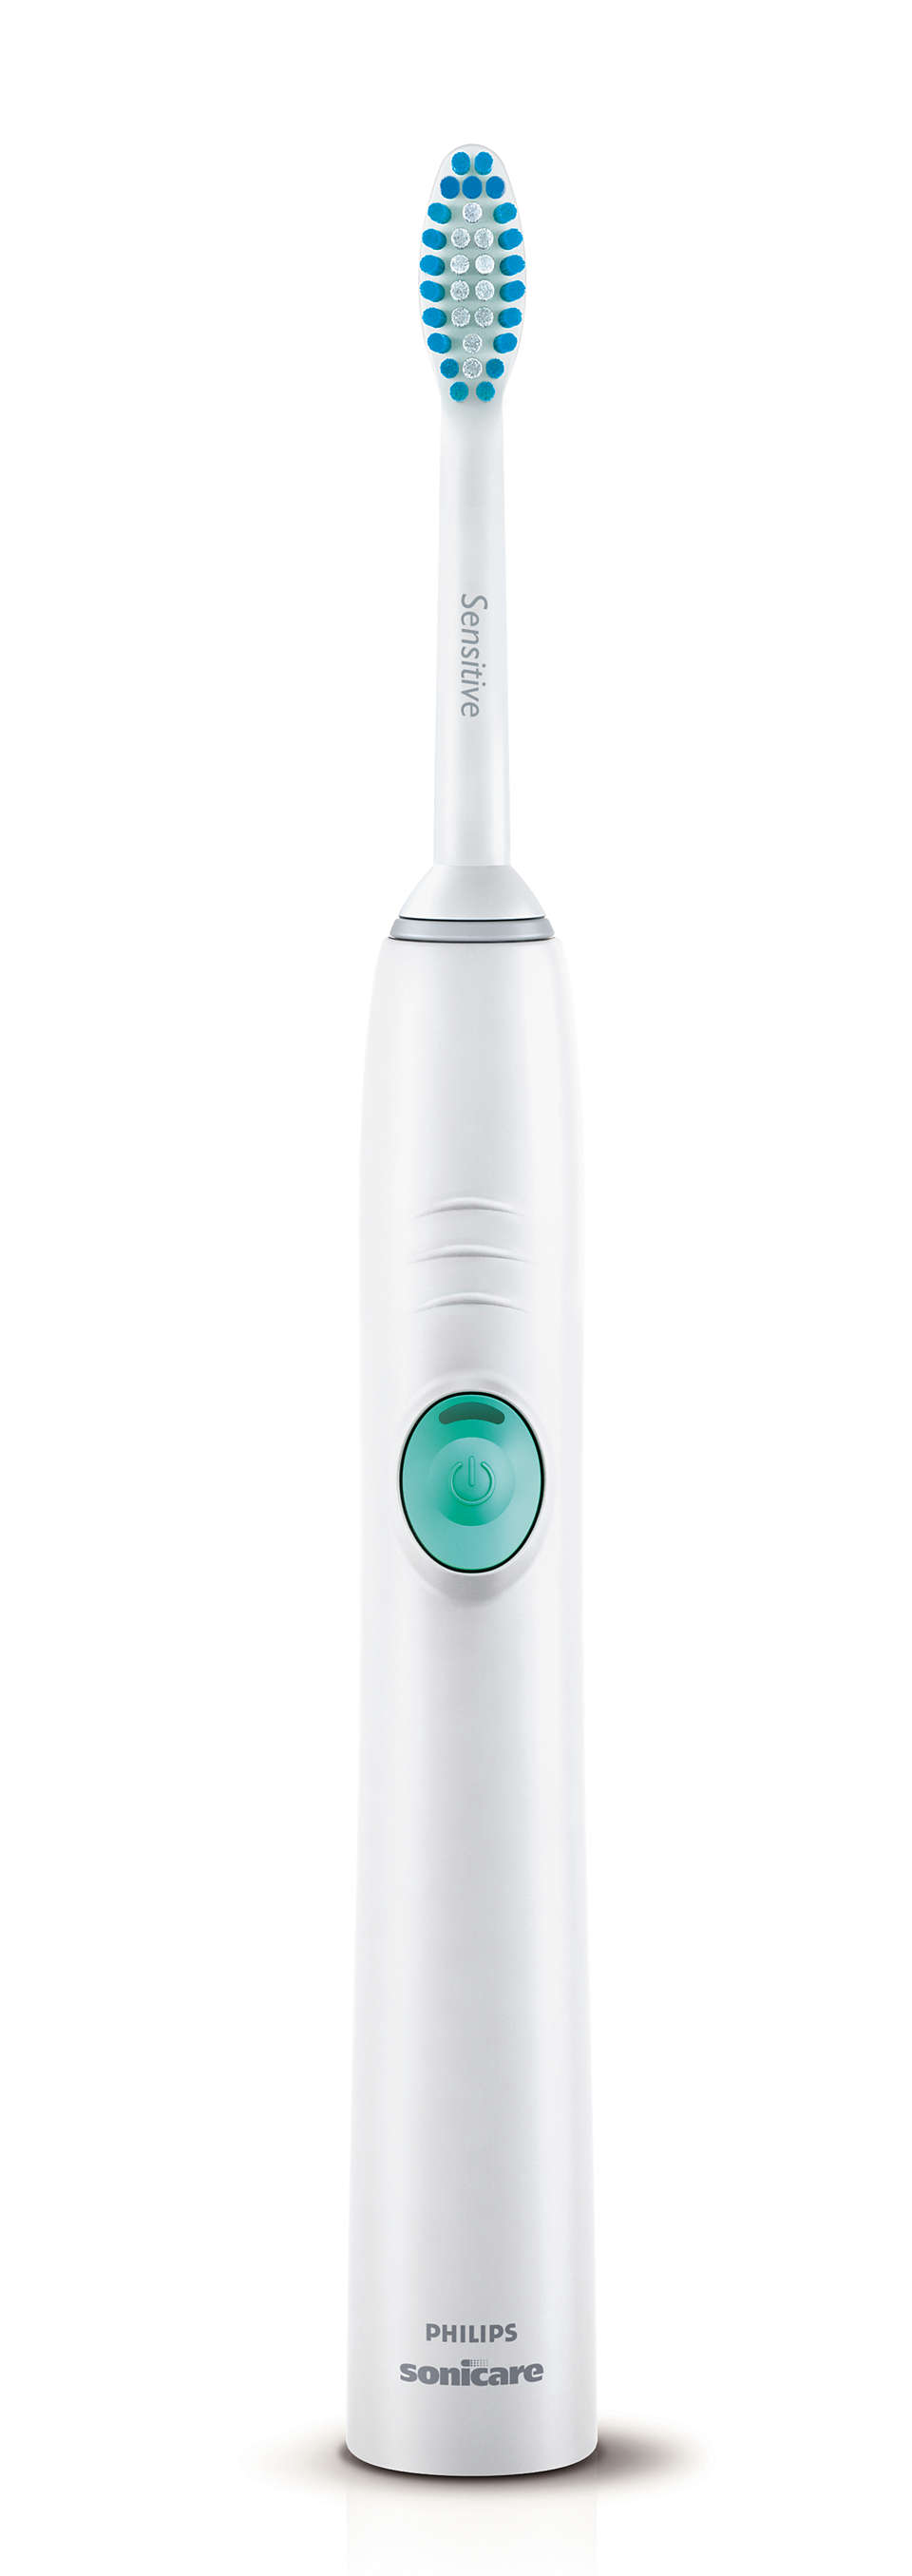 EasyClean Sonic electric toothbrush HX6554/07 | Sonicare